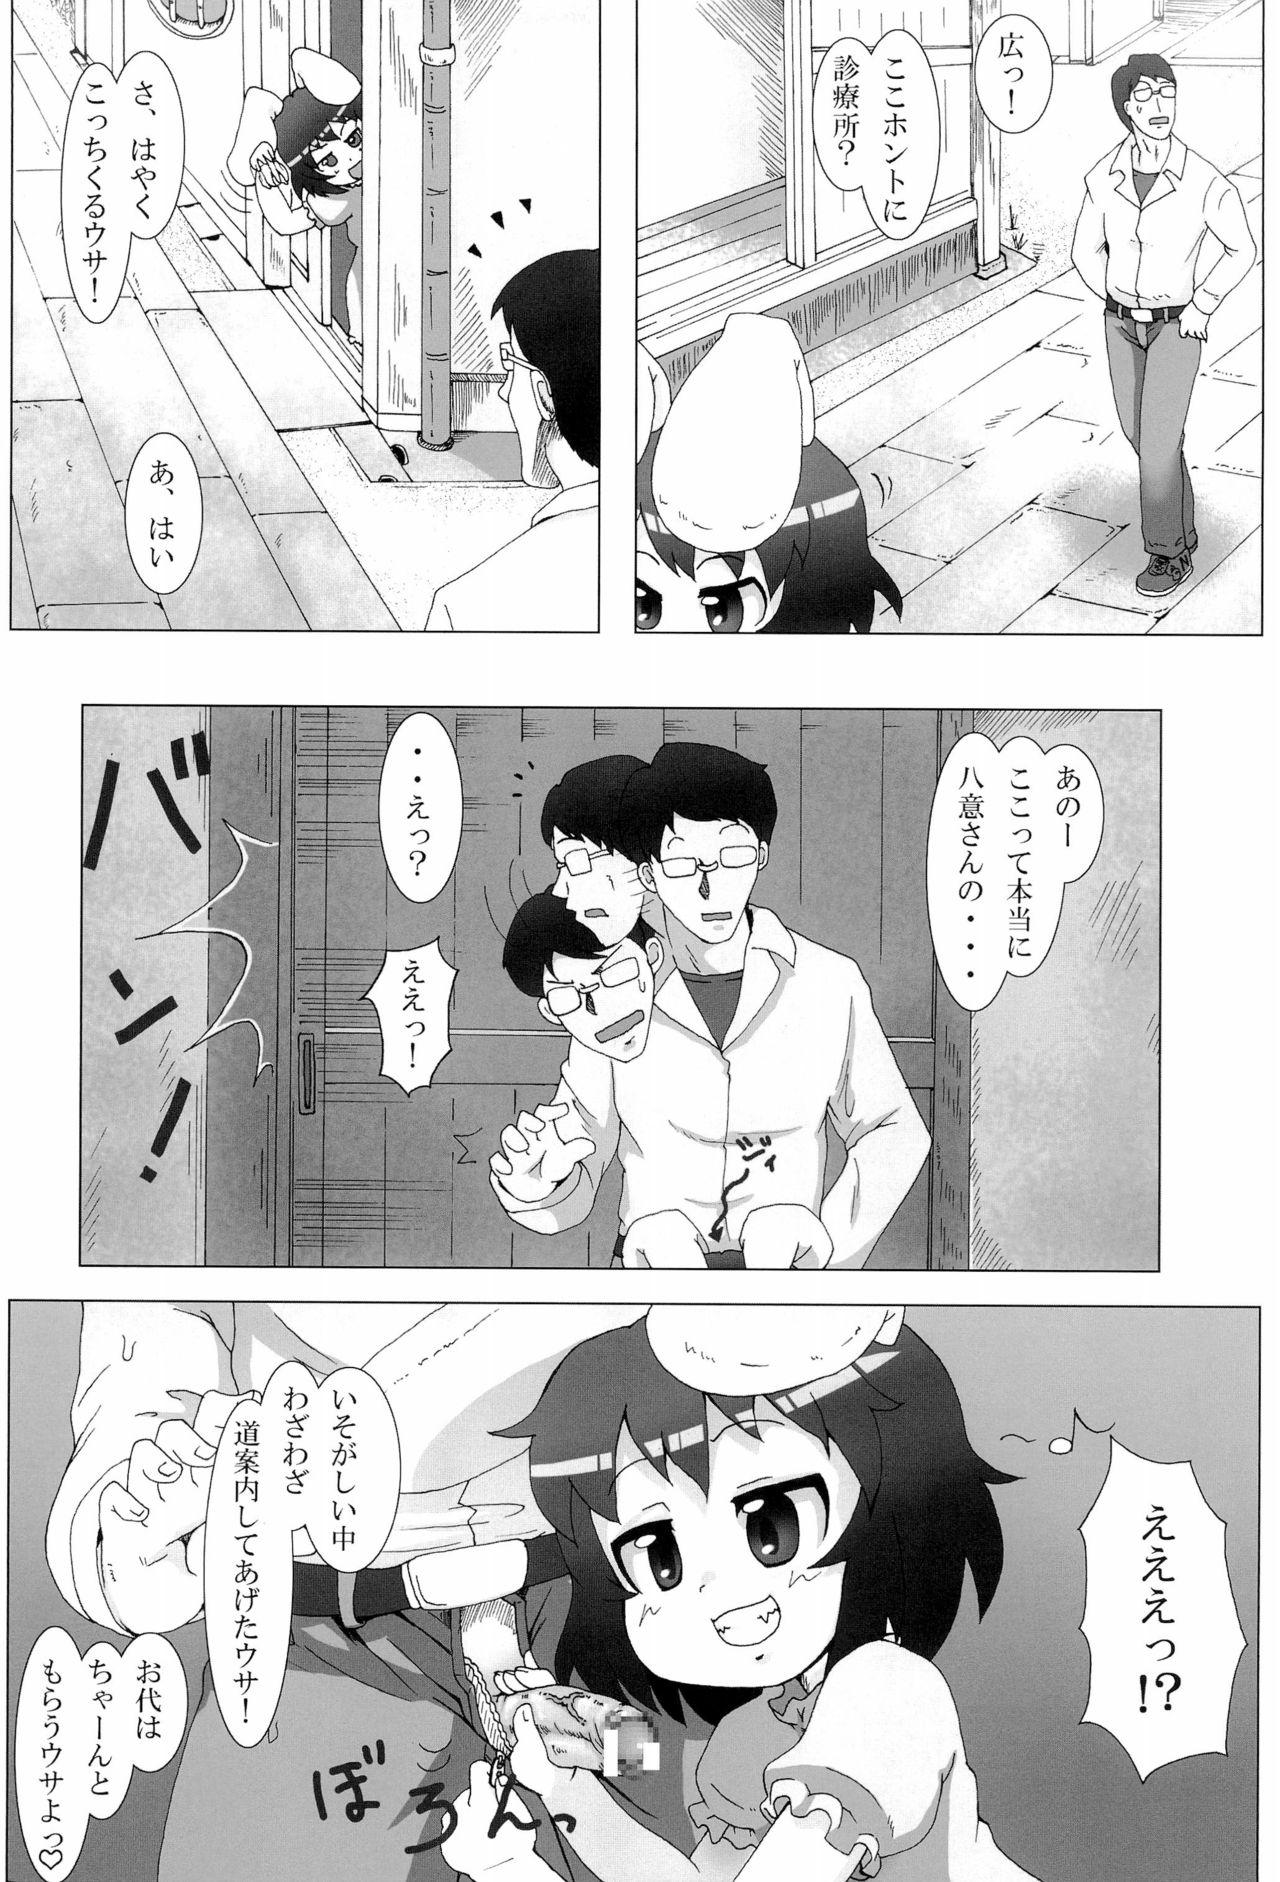 Cut Tewi Bitch 2 - Touhou project Teensex - Page 7